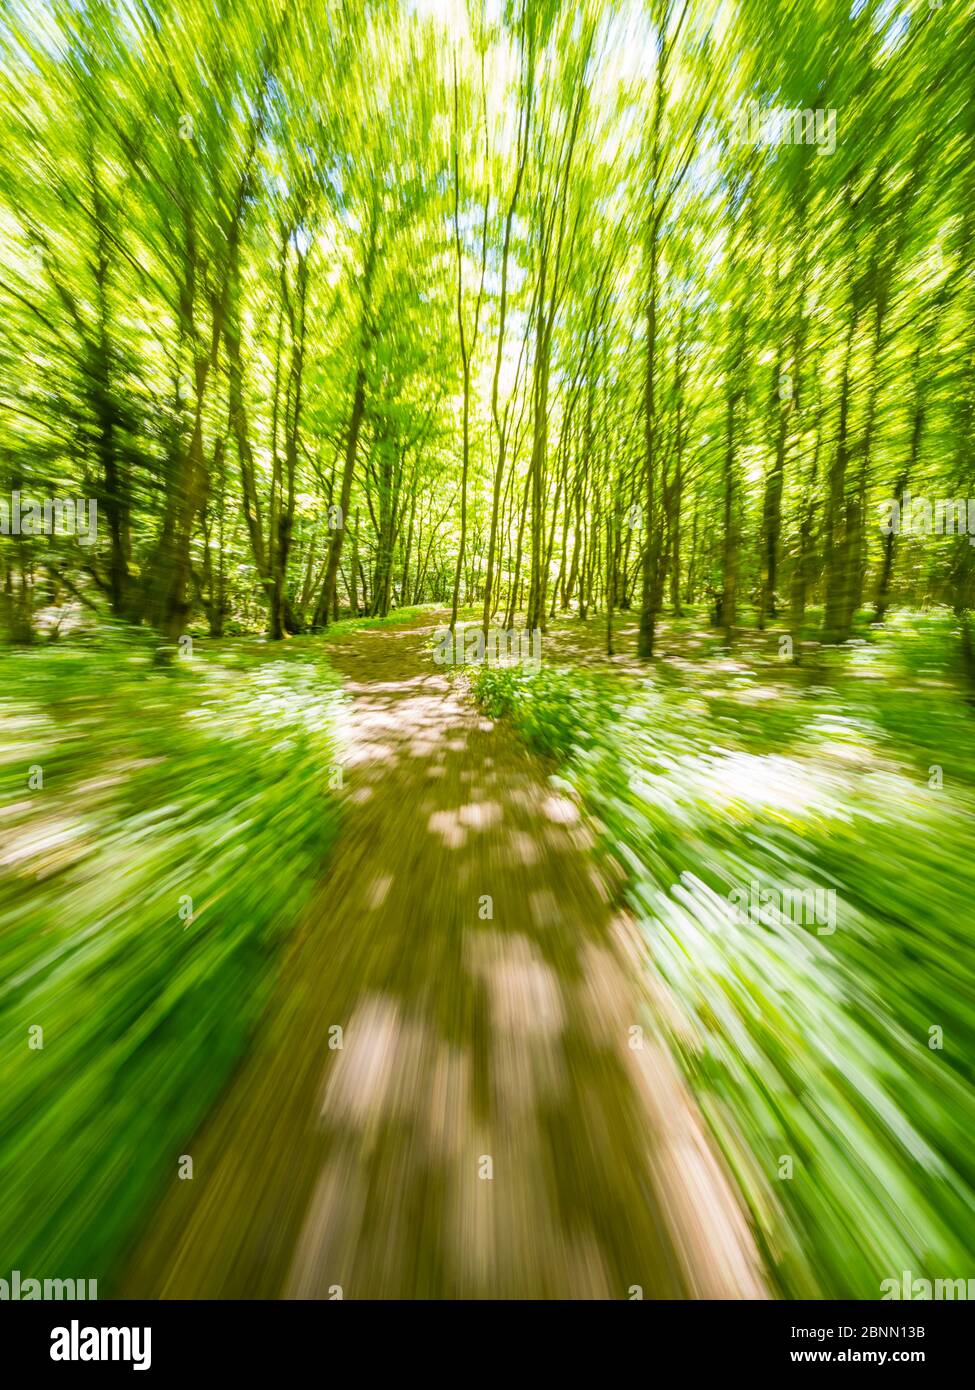 Stunning Spring Green nature color in forest while running simulated sprinter run intentionally blurry trail foottrail Zeleni vir Skrad Croatia Europe Stock Photo